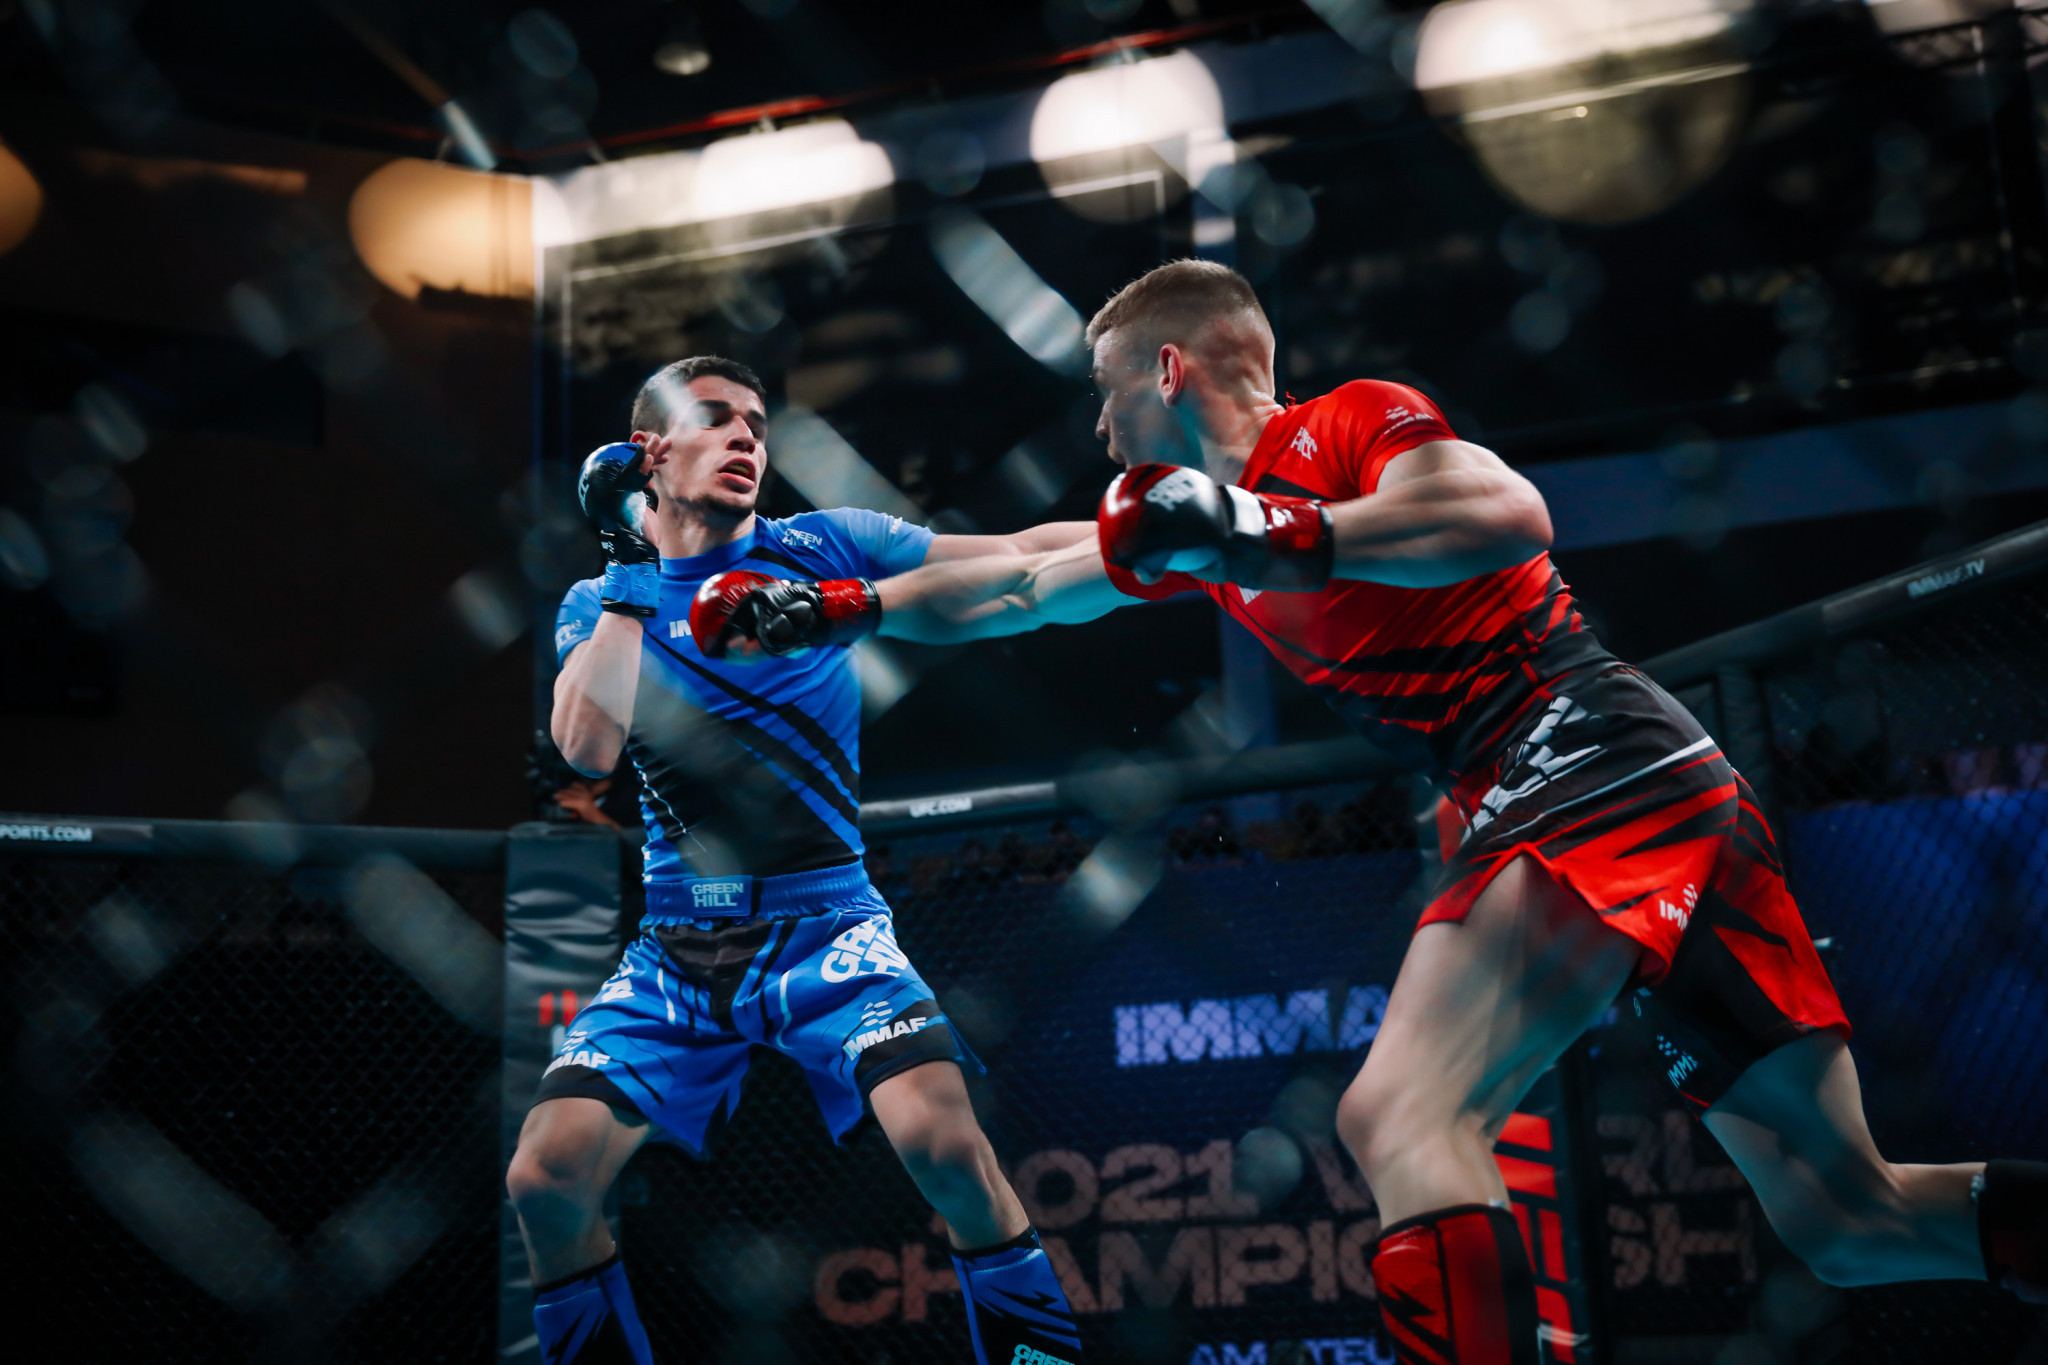 insidethegames is reporting LIVE from the IMMAF World Championships in Abu Dhabi